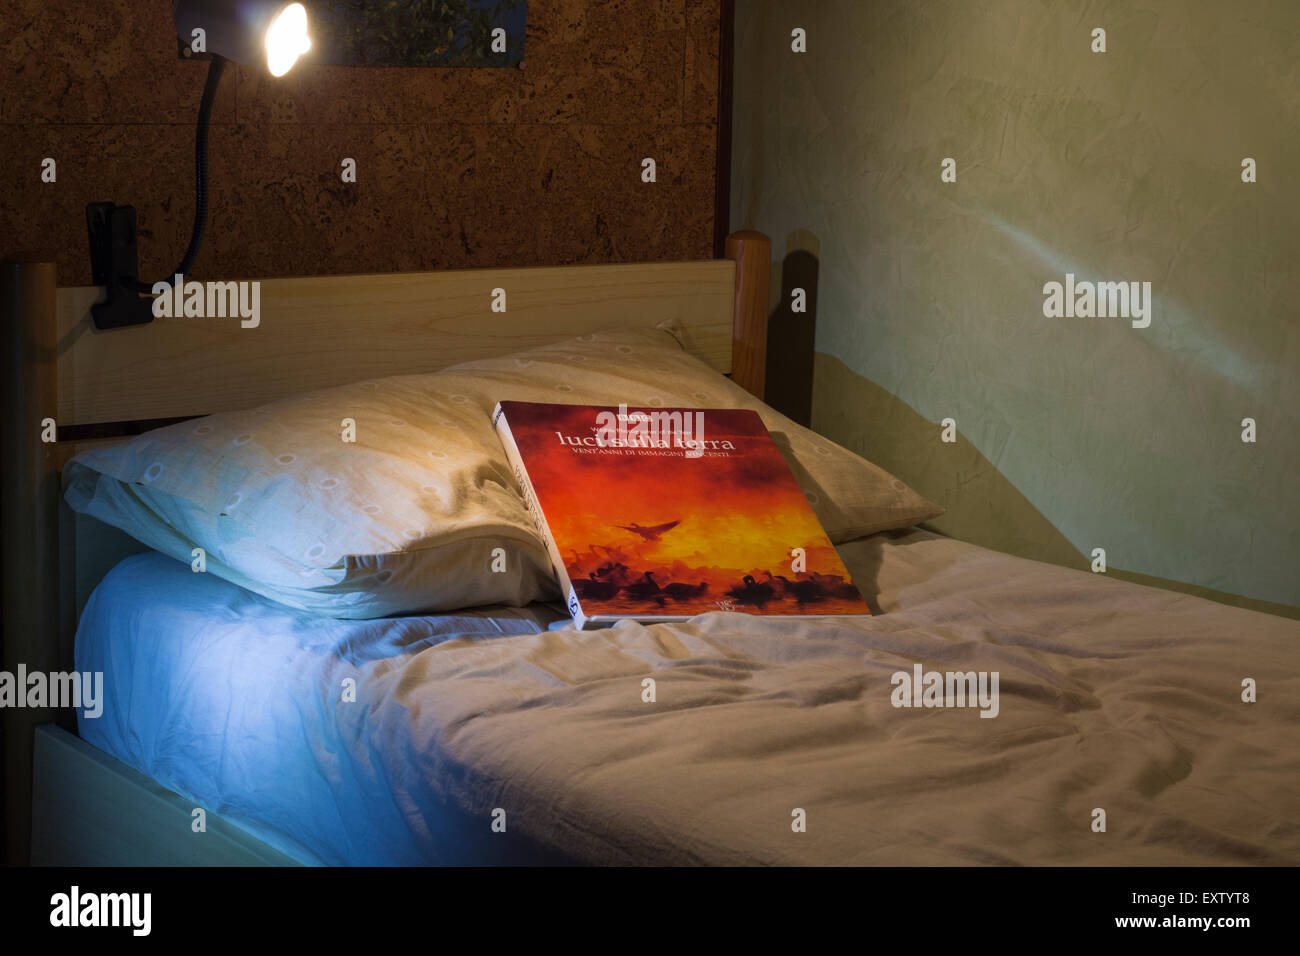 BBC Wildlife Photographs book on the bed Stock Photo